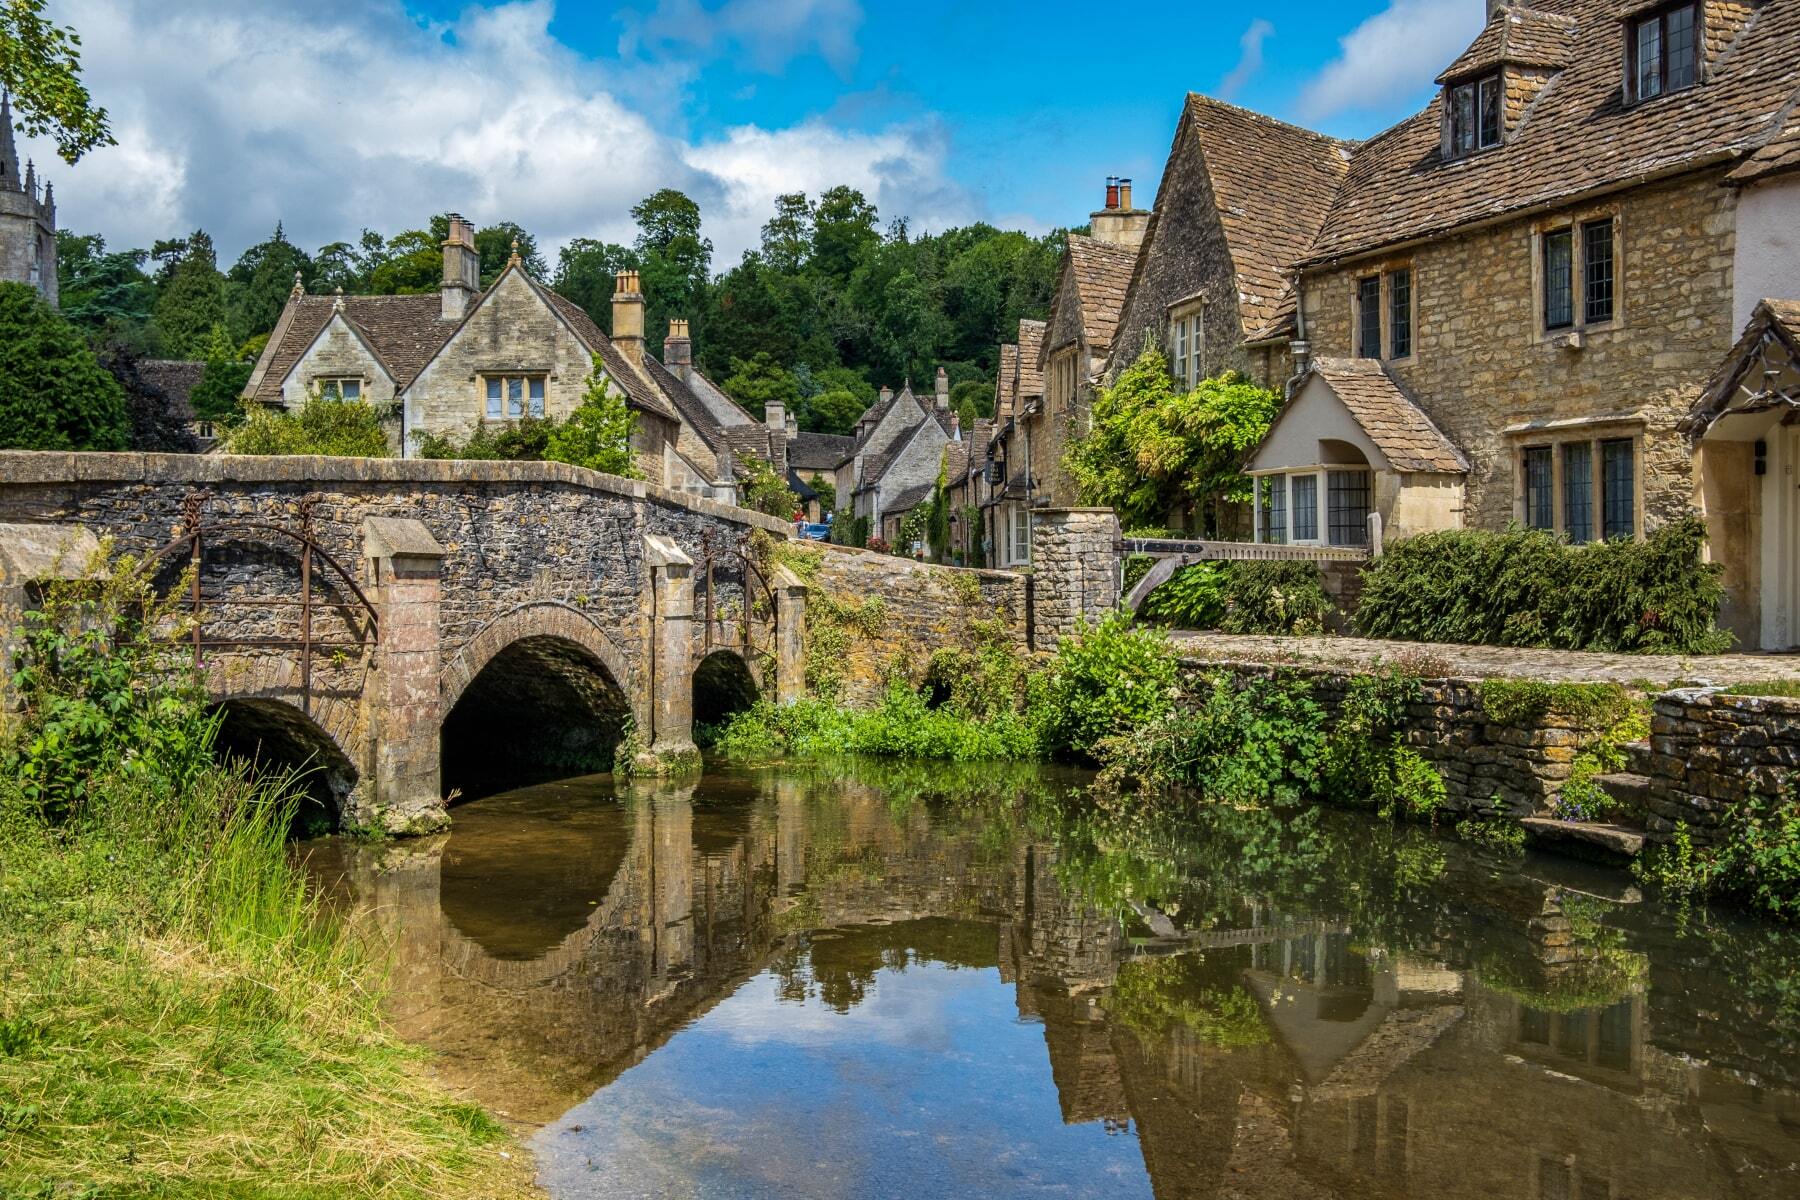 <p>The <a href="https://www.cotswolds.com" class="atom_link atom_valid" rel="noreferrer noopener">Cotswolds</a> villages look like something straight out of an Agatha Christie novel. And if you want to be instantly transported to another era, Castle Combe is one area you won’t want to miss. Its bucolic houses and picturesque pastoral streets make it the ideal place to take it easy and stop time.</p>